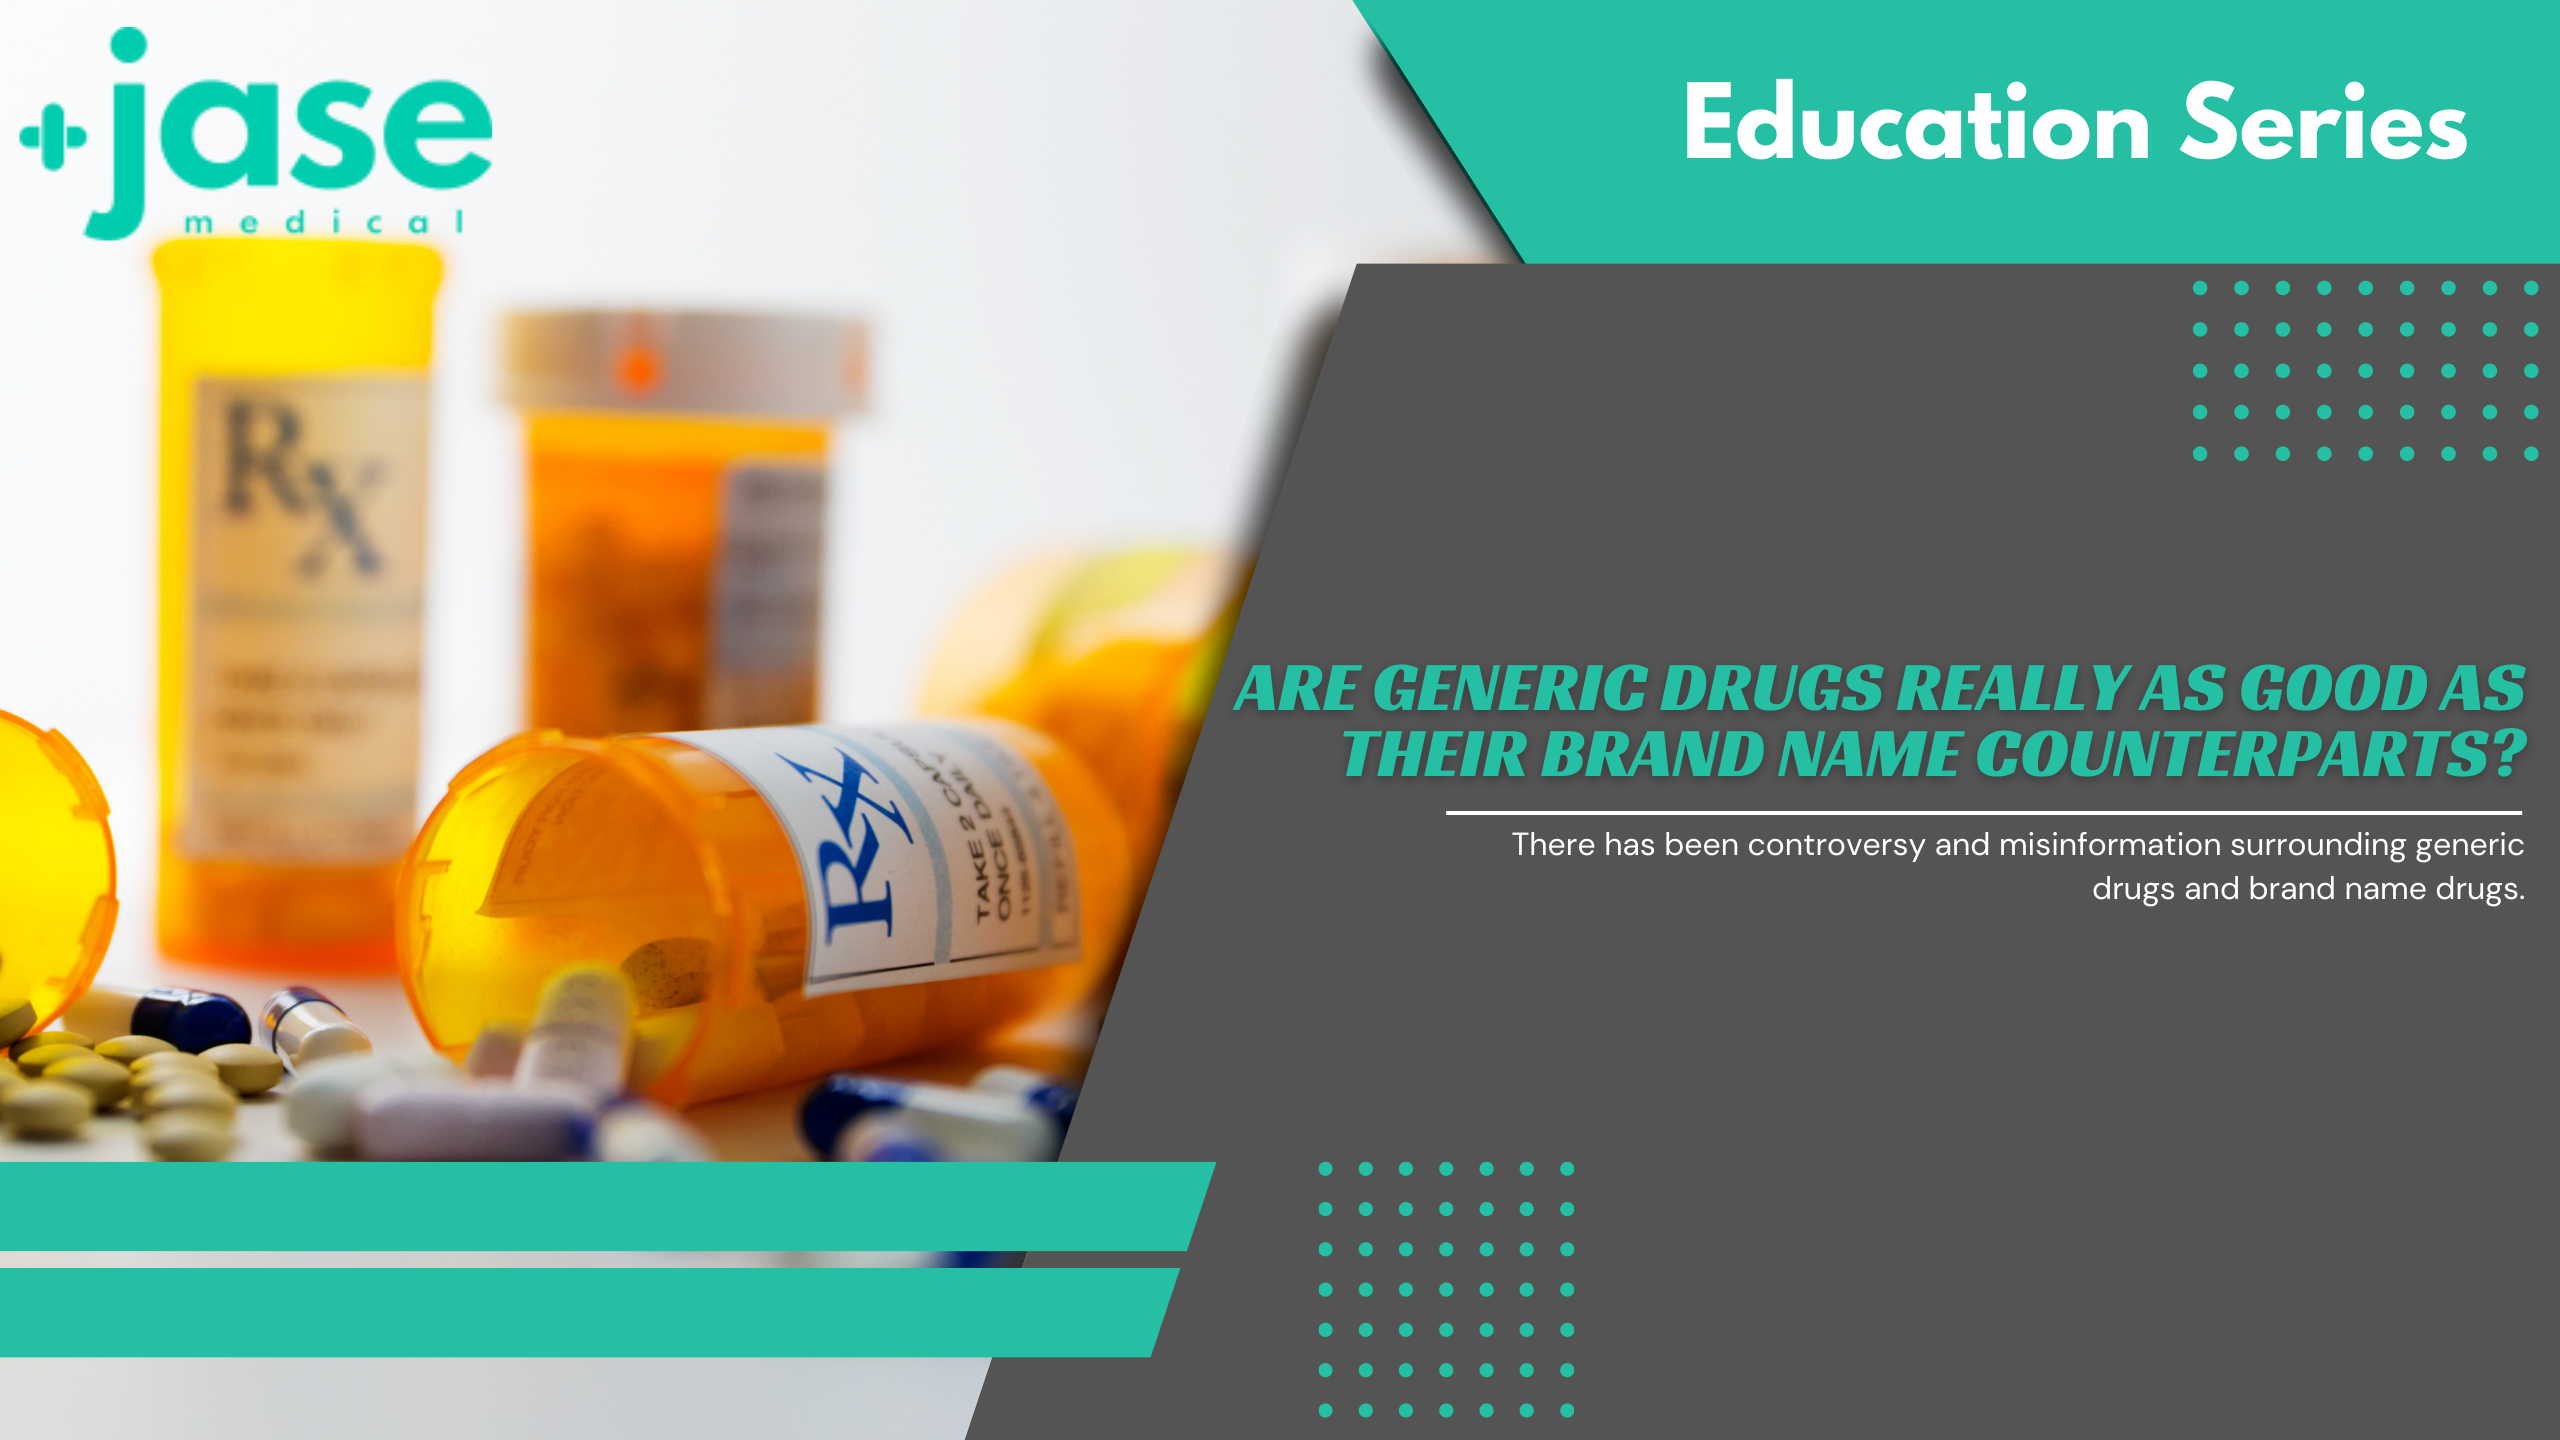 Are Generic Drugs Really as Good as Their Brand Name Counterparts?